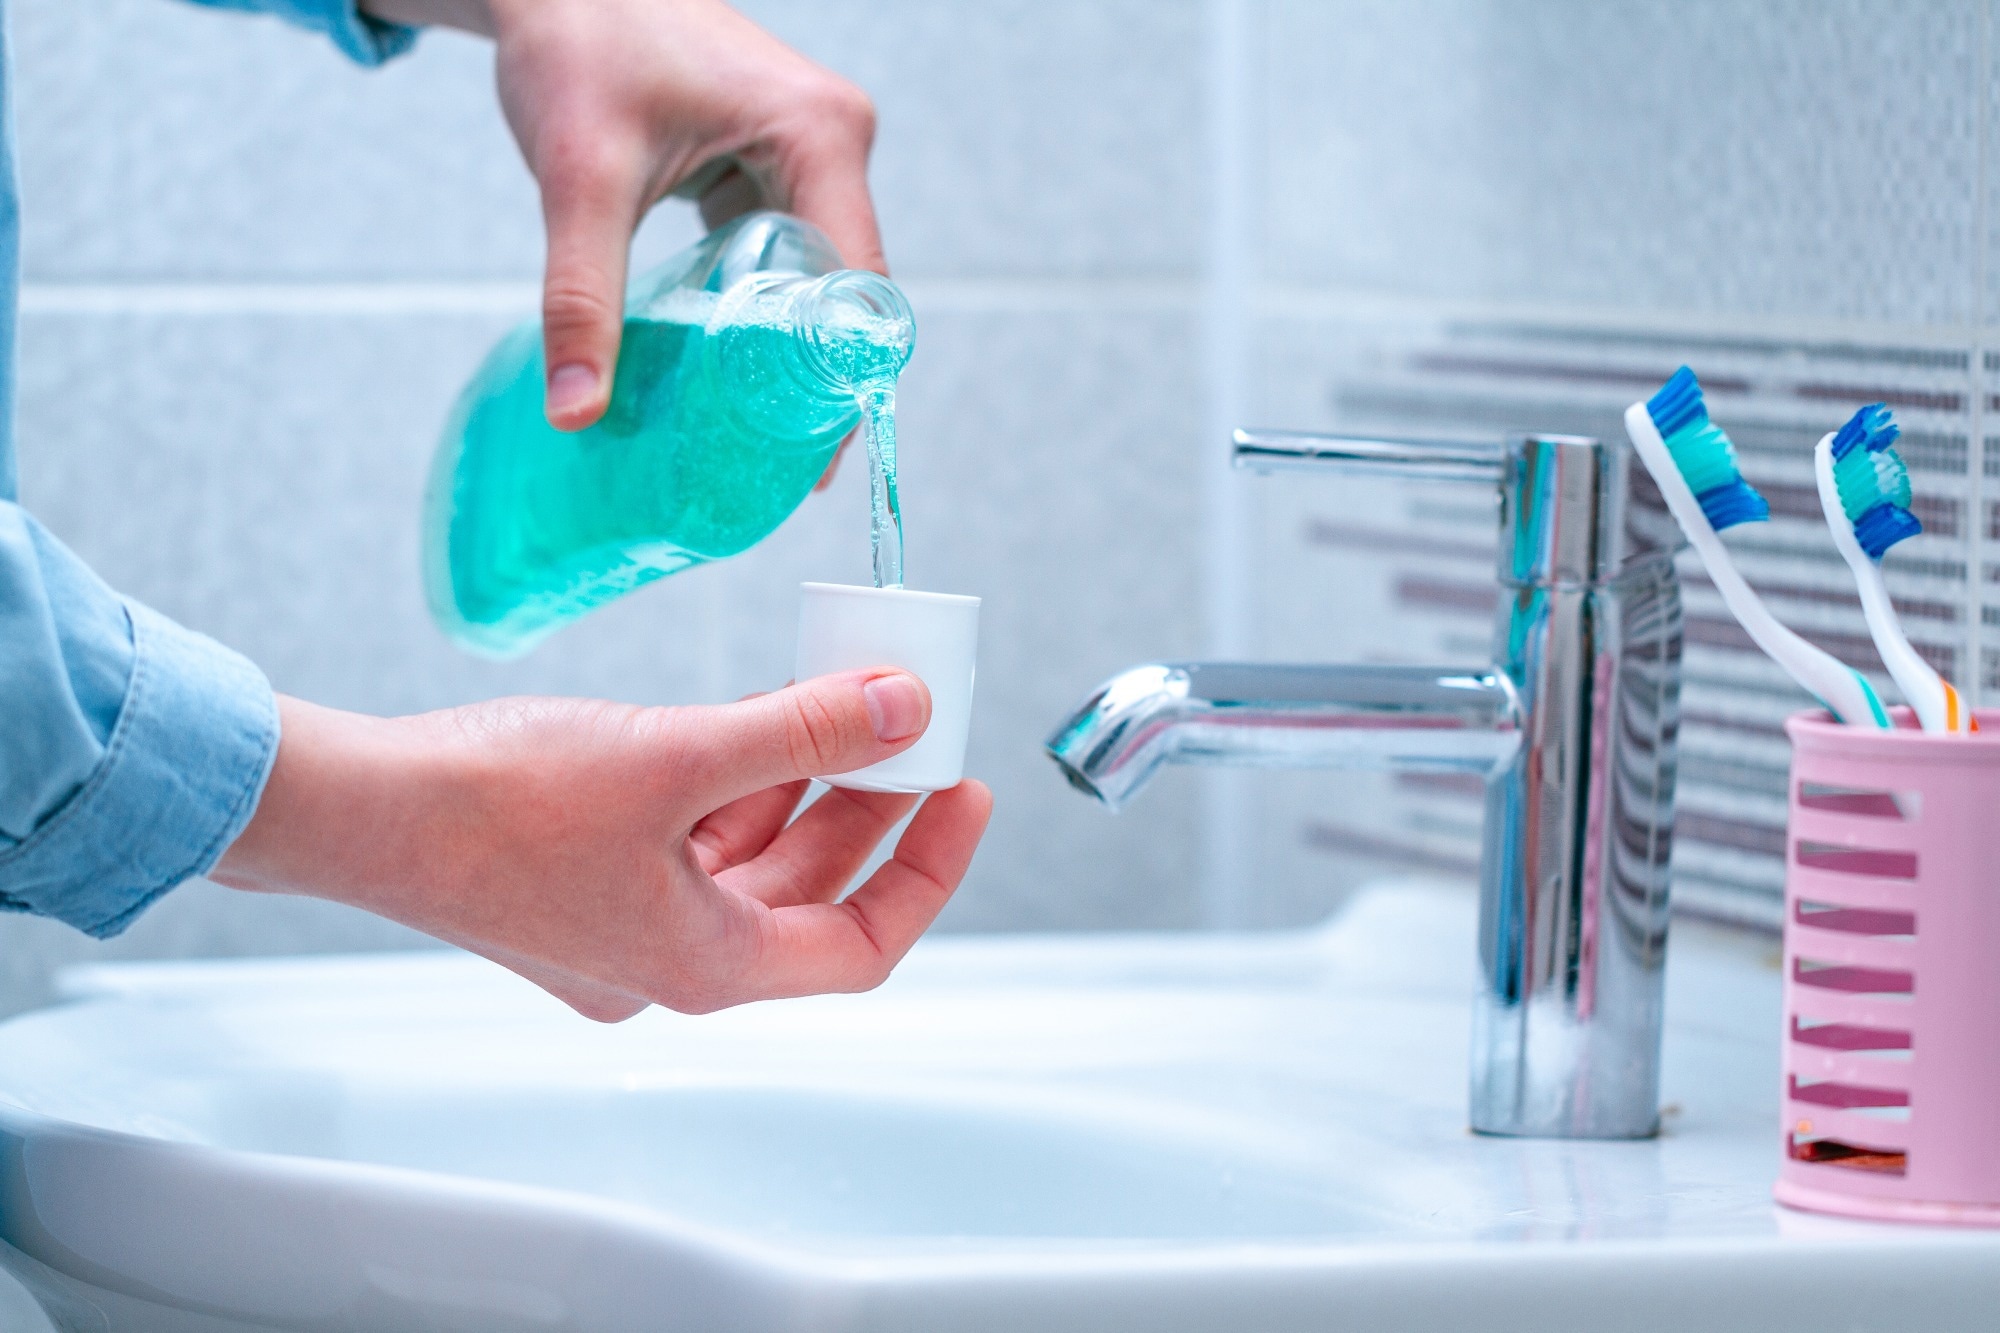 Study: Ingredients in Commercially Available Mouthwashes: A Review. Image Credit: goffkein.pro / Shutterstock.com